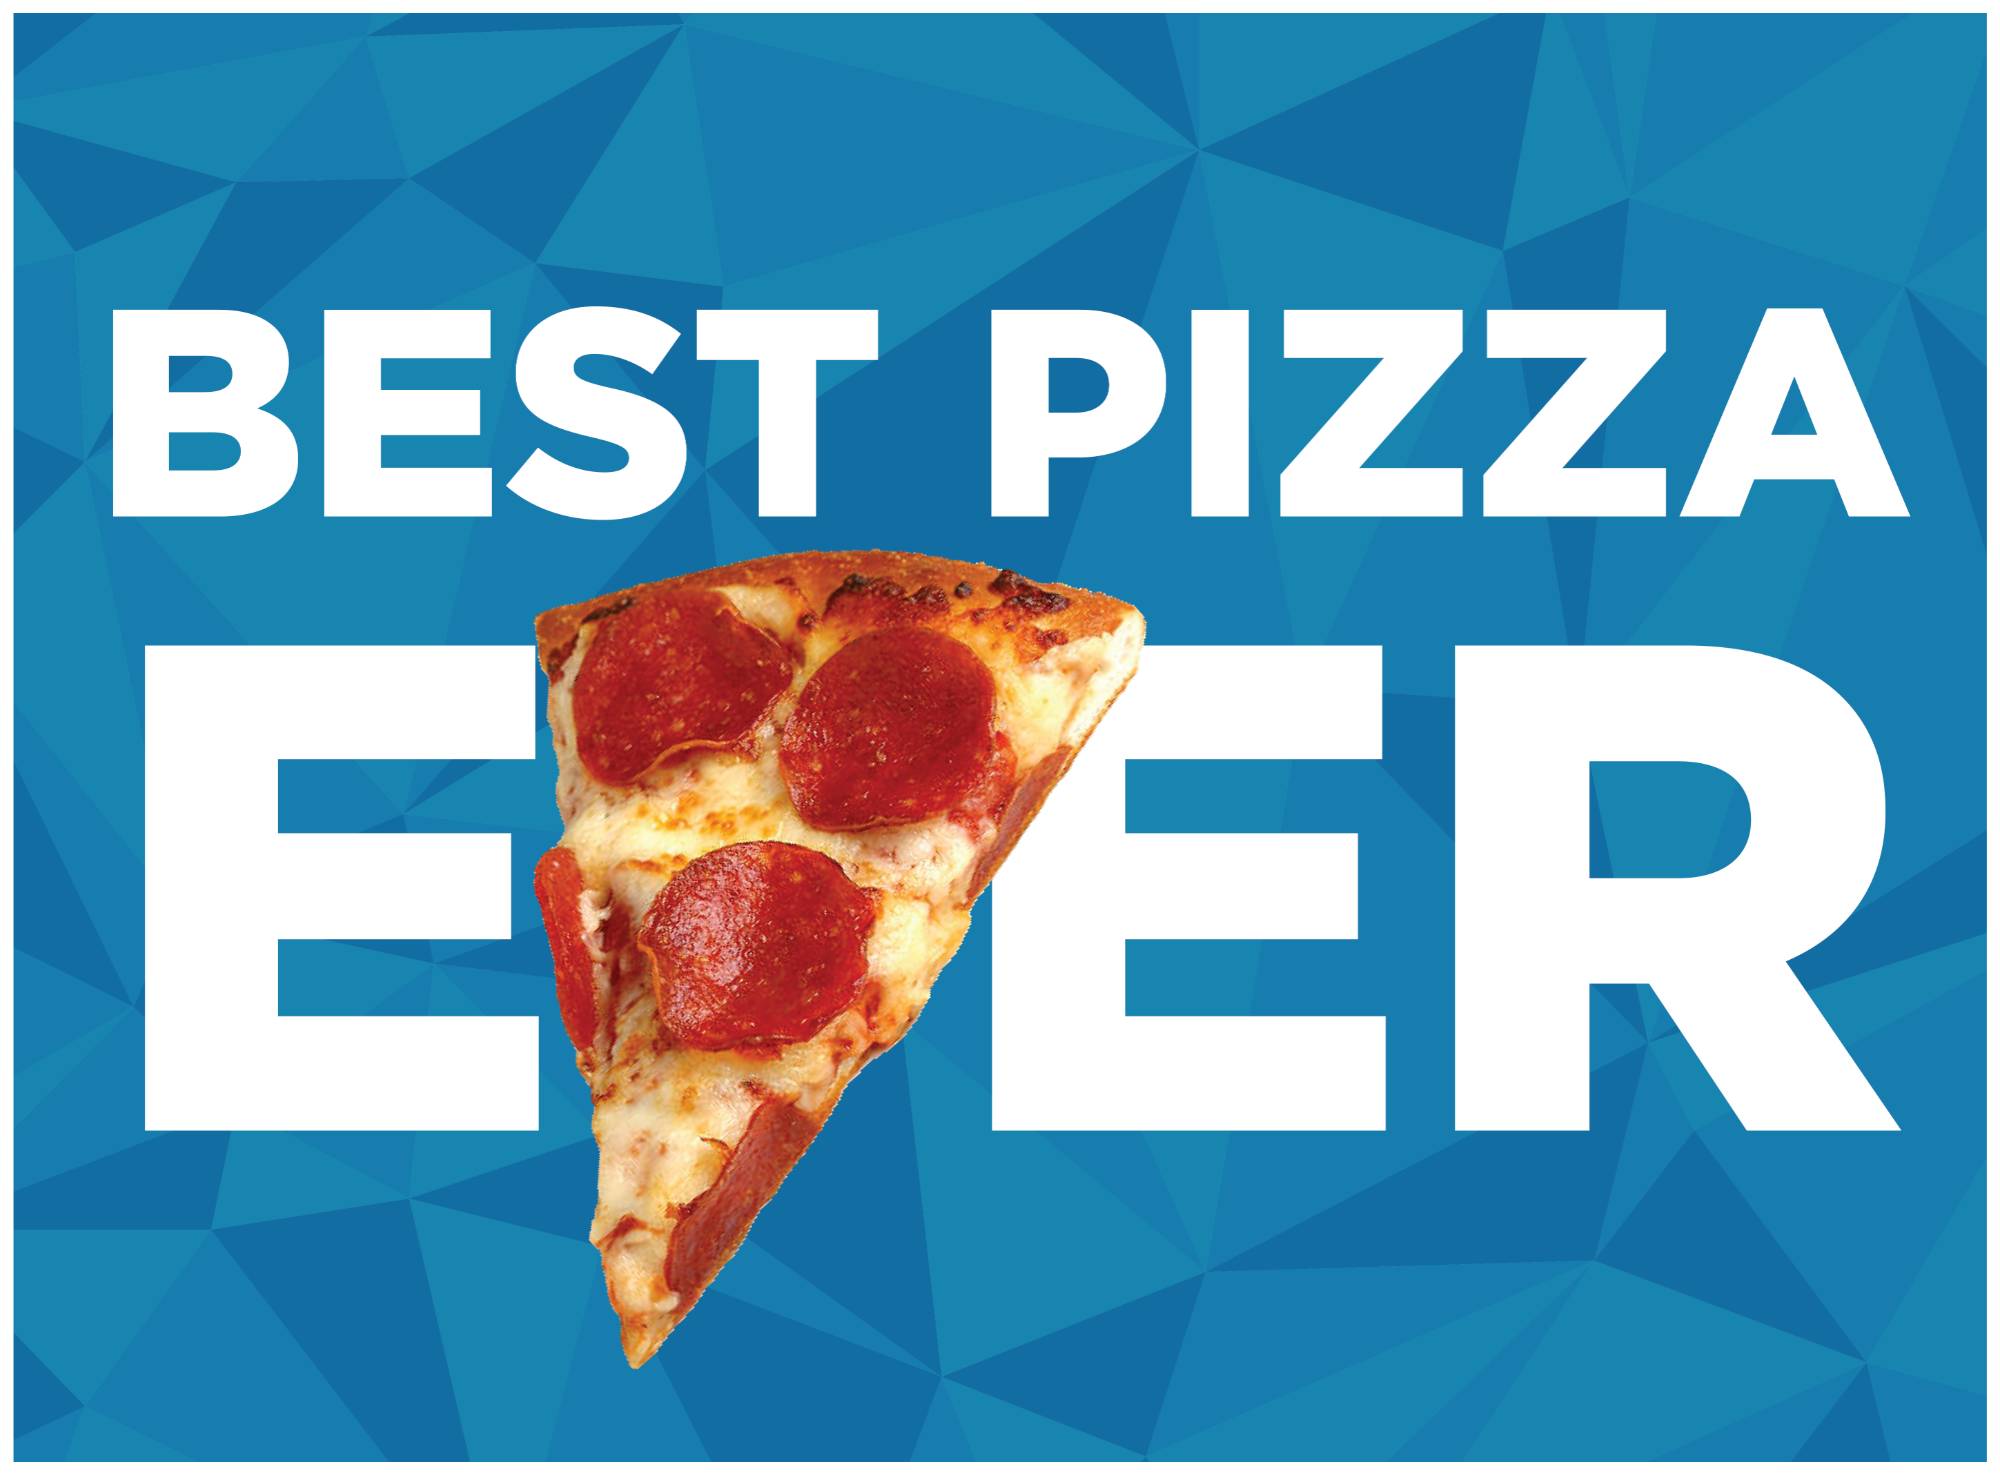 Best pizza ever graphic